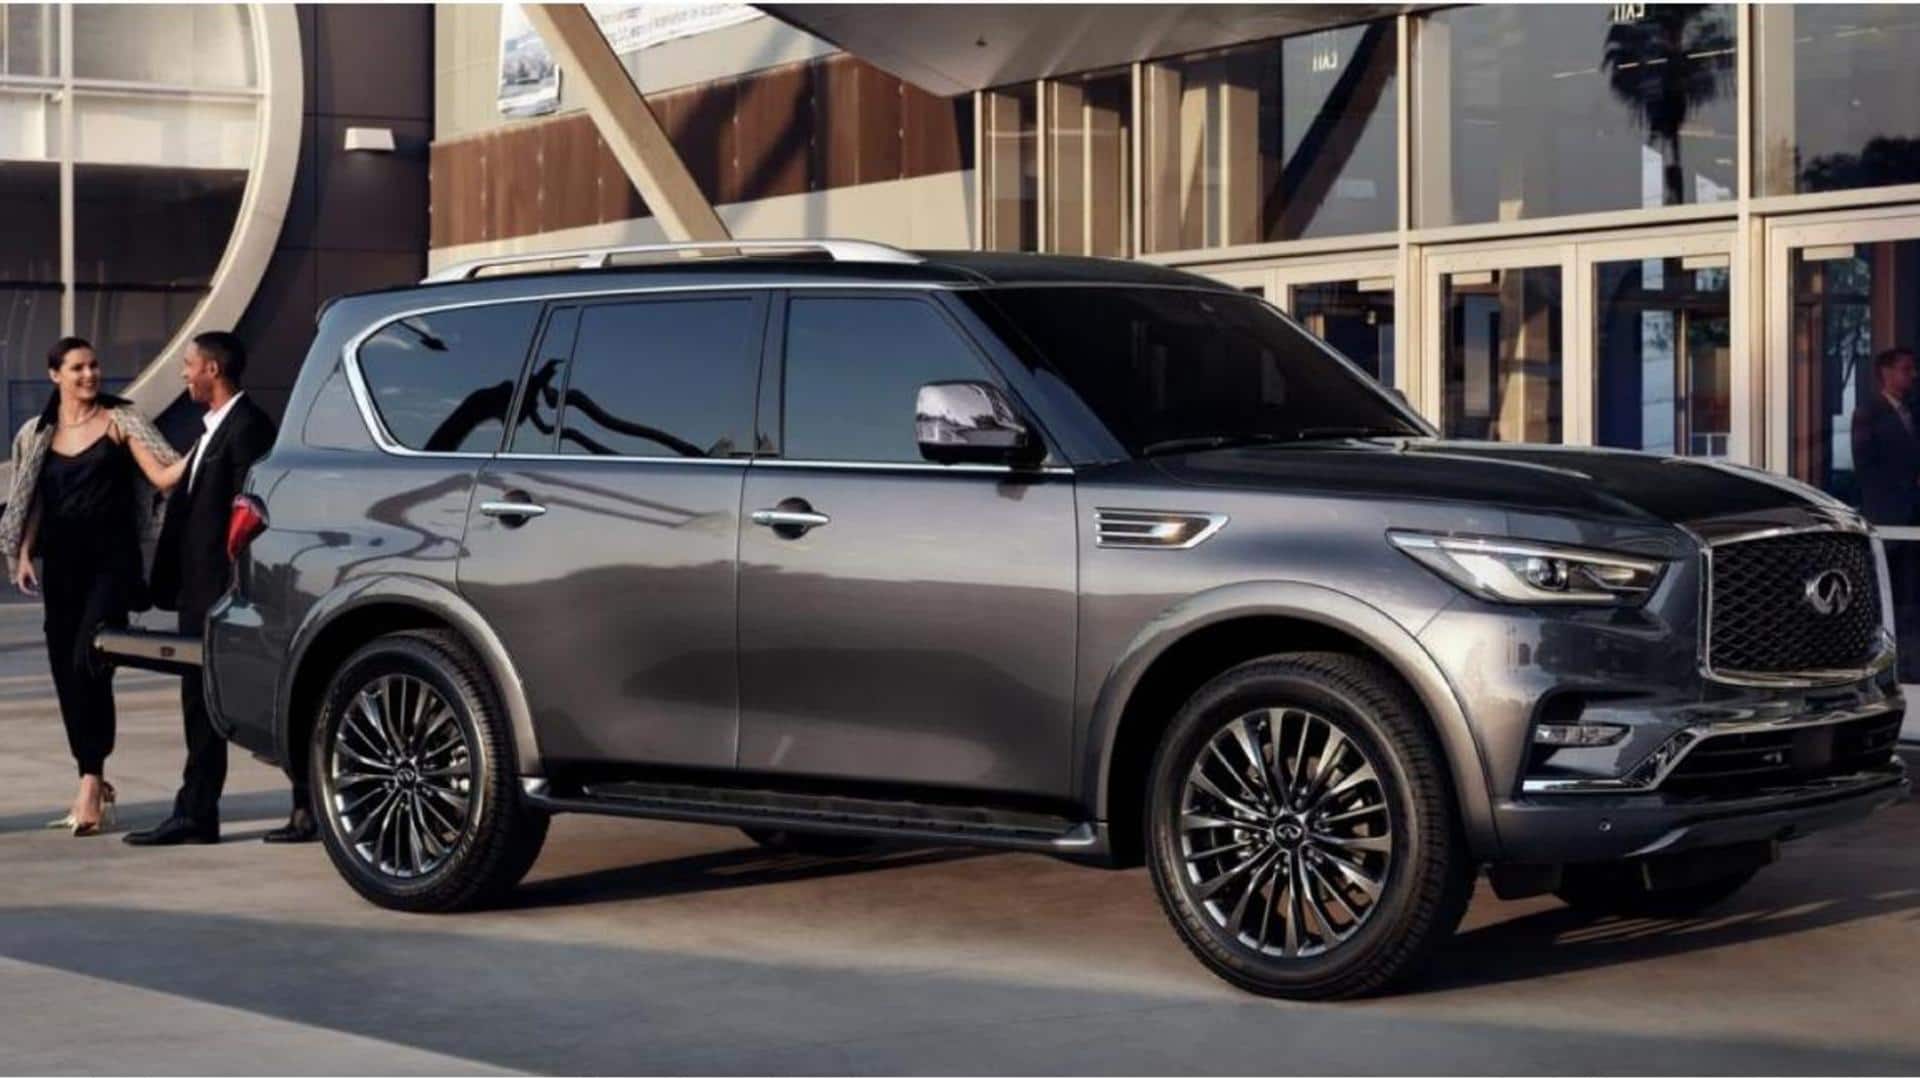 This is what the next-generation INFINITI QX80 SUV might offer